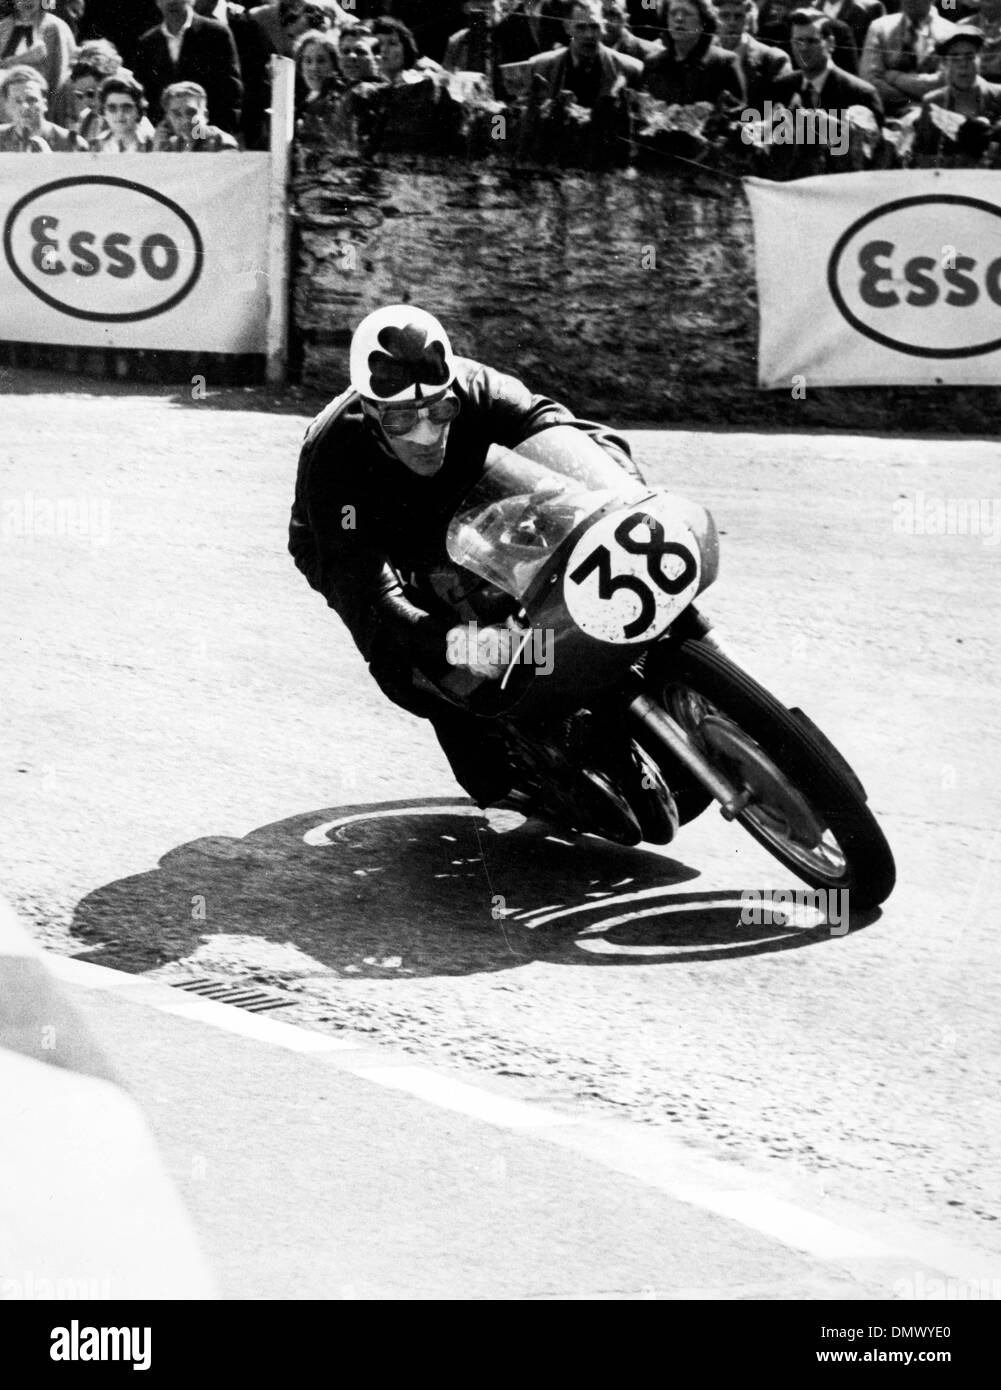 June 13, 1955 - Isle of Man, U.K. - REG ARMSTRONG of Dublin, at speed at Quarter Bridge, when he took second place in the Senior T.T. on the Isle of Man. His speed was 96.74 m.p.h., on a Gilera. The even was won by Geoff Duke at the record speed of 97.93 m.p.h.. PICTURED: Armstrong during the race.  (Credit Image: © KEYSTONE Pictures USA/ZUMAPRESS.com) Stock Photo